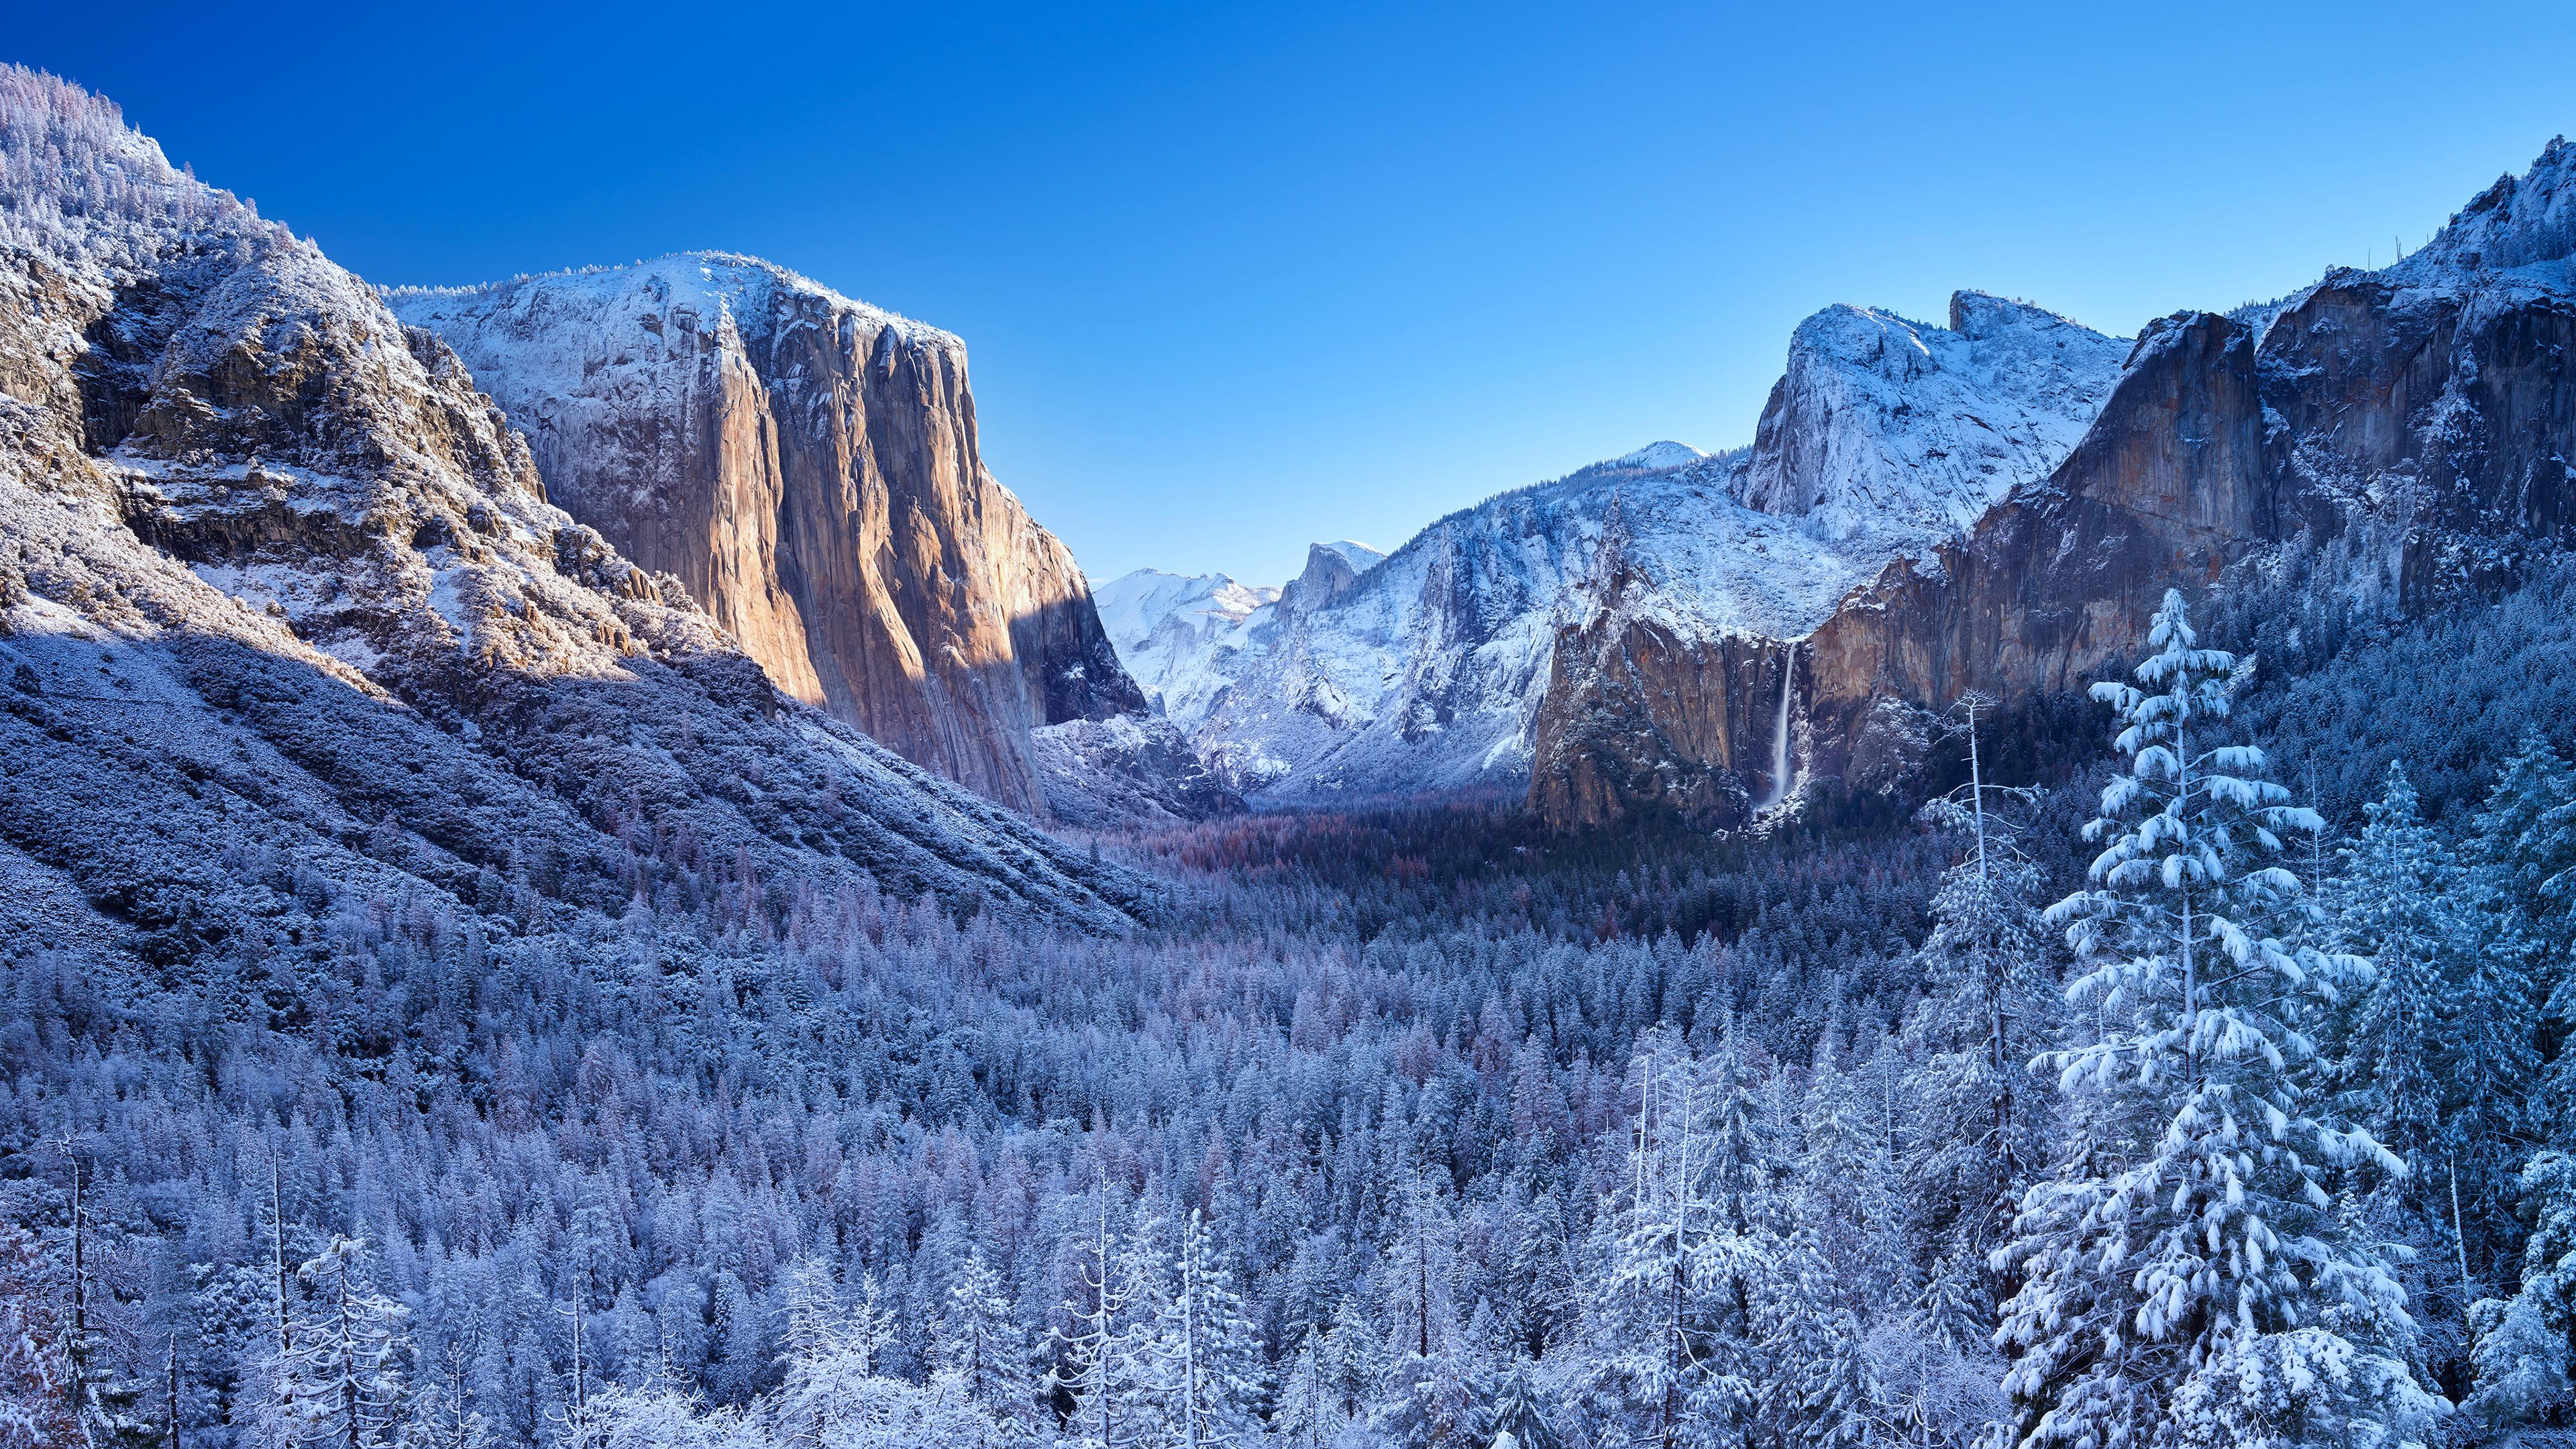 General 3840x2160 nature landscape mountains sky winter trees forest clear sky snowy mountain snow Yosemite National Park valley California USA